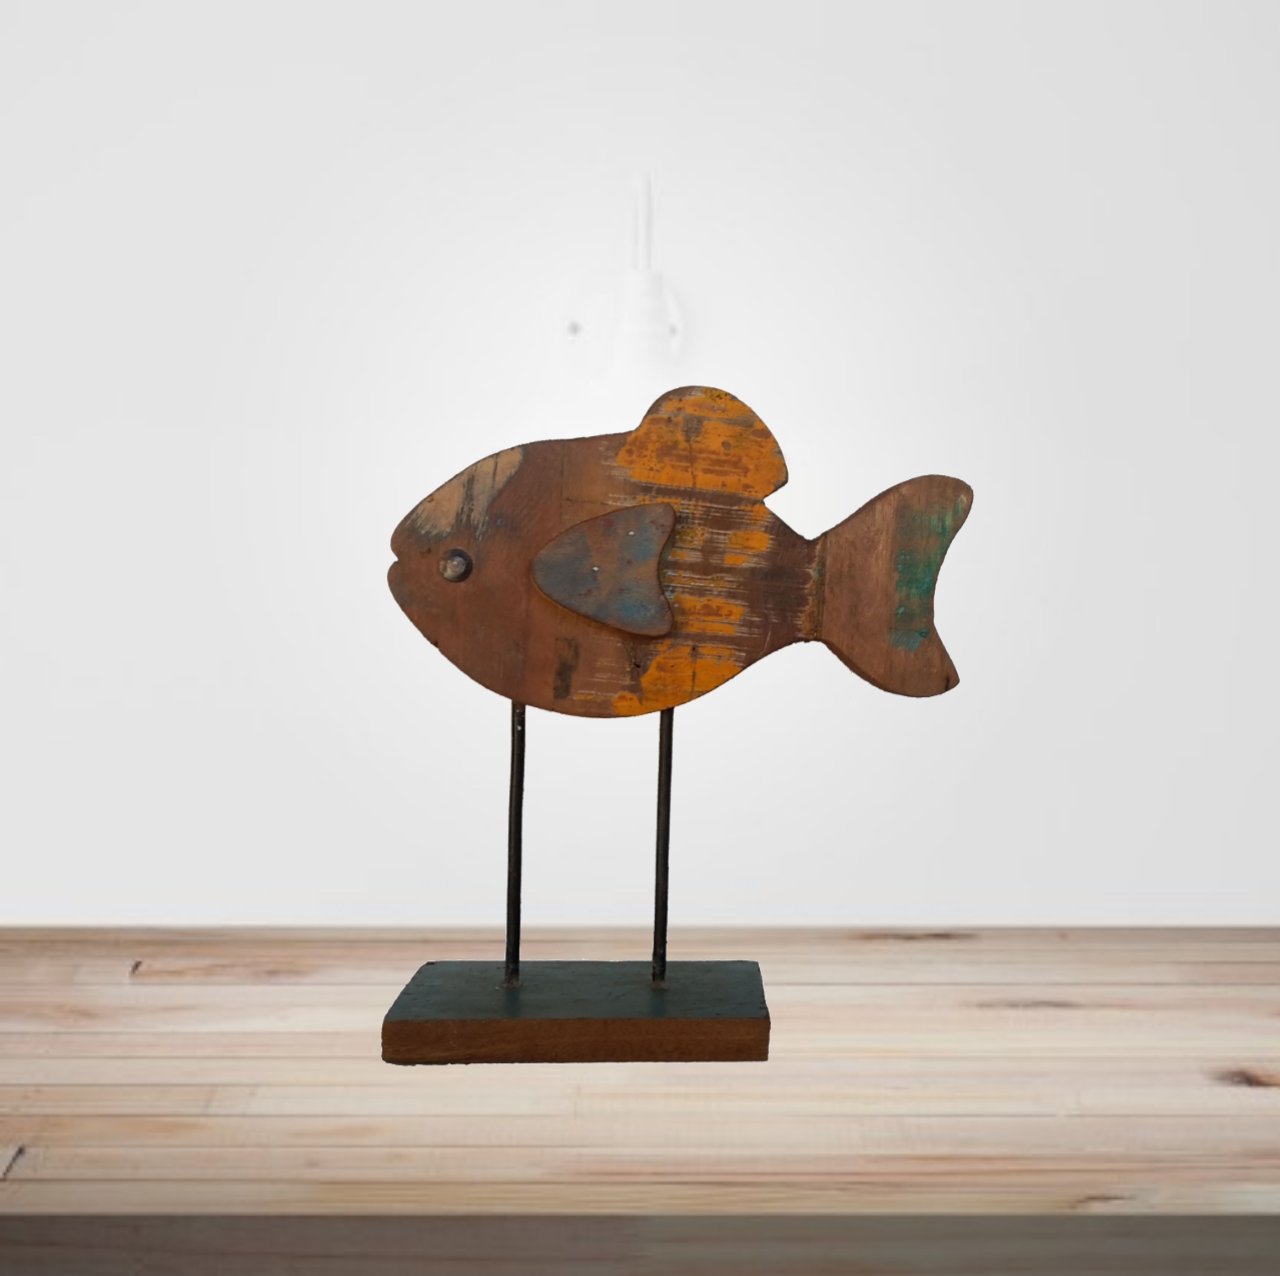 https://www.kraphy.com/wp-content/uploads/2017/07/recycled-wooden-fish-2.jpg